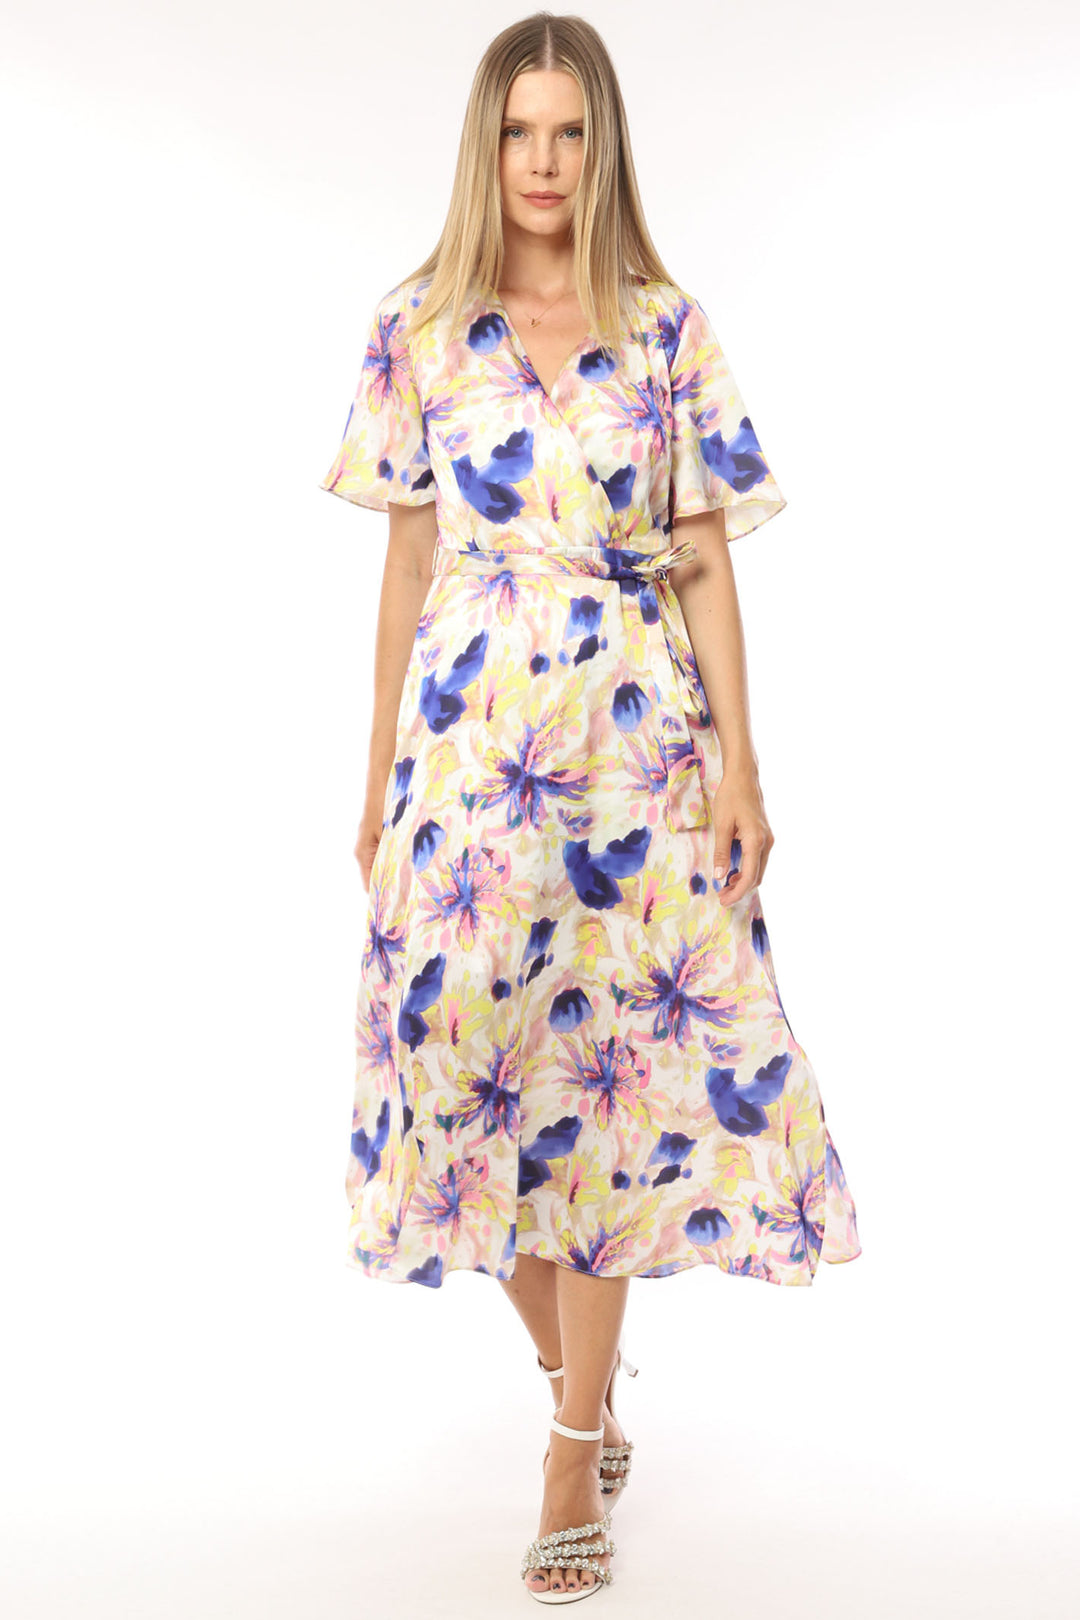 Ella Boo 2306-35 Pink Yellow Print Wrap Style Midi Occasion Dress - Rouge Boutique Inverness